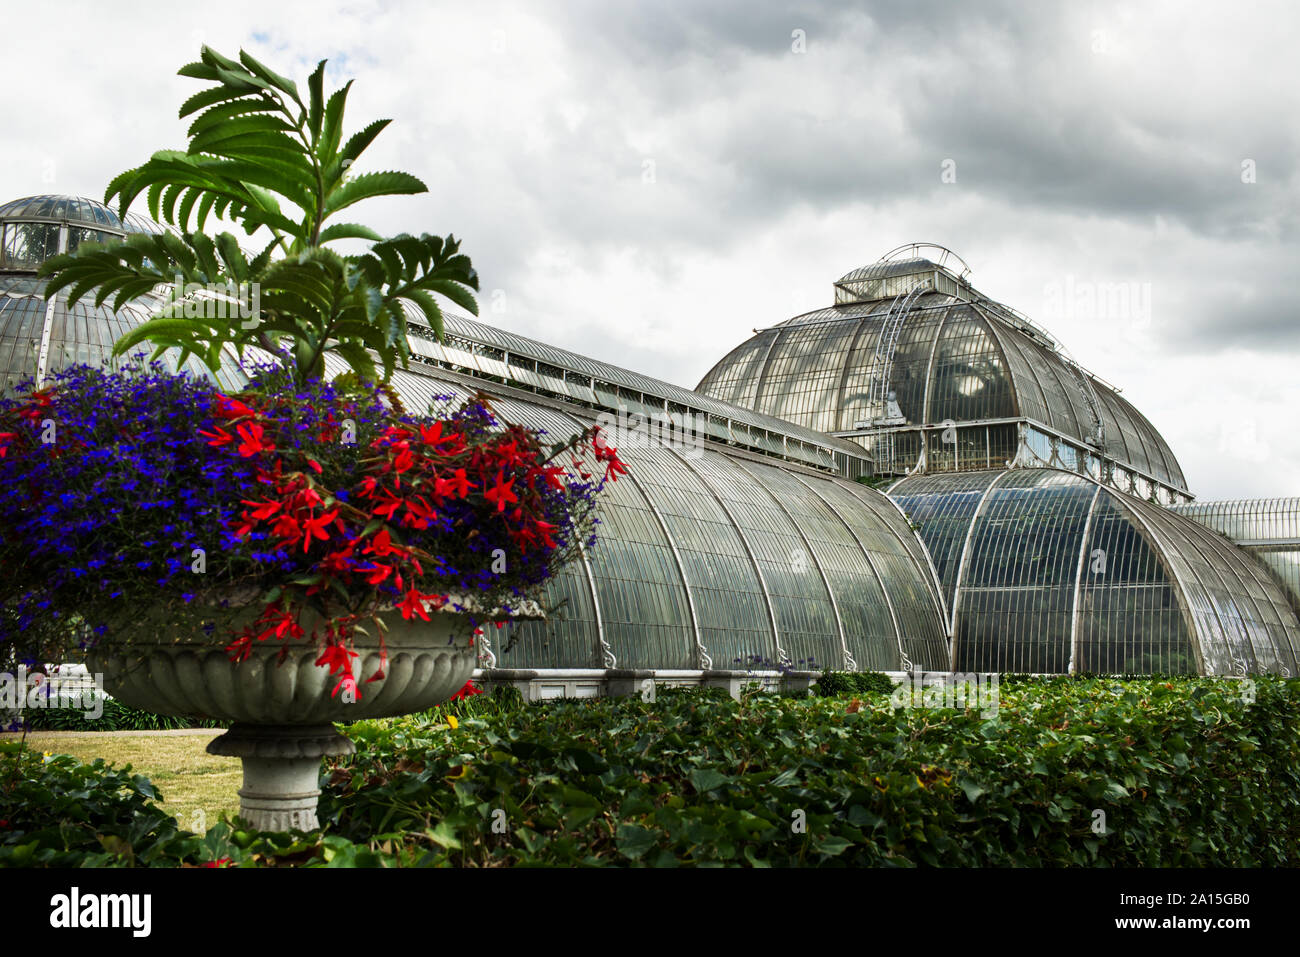 Exterior of the Palm House, a Victorian glasshouse at Kew Gardens, Richmond, London, England, UK Stock Photo